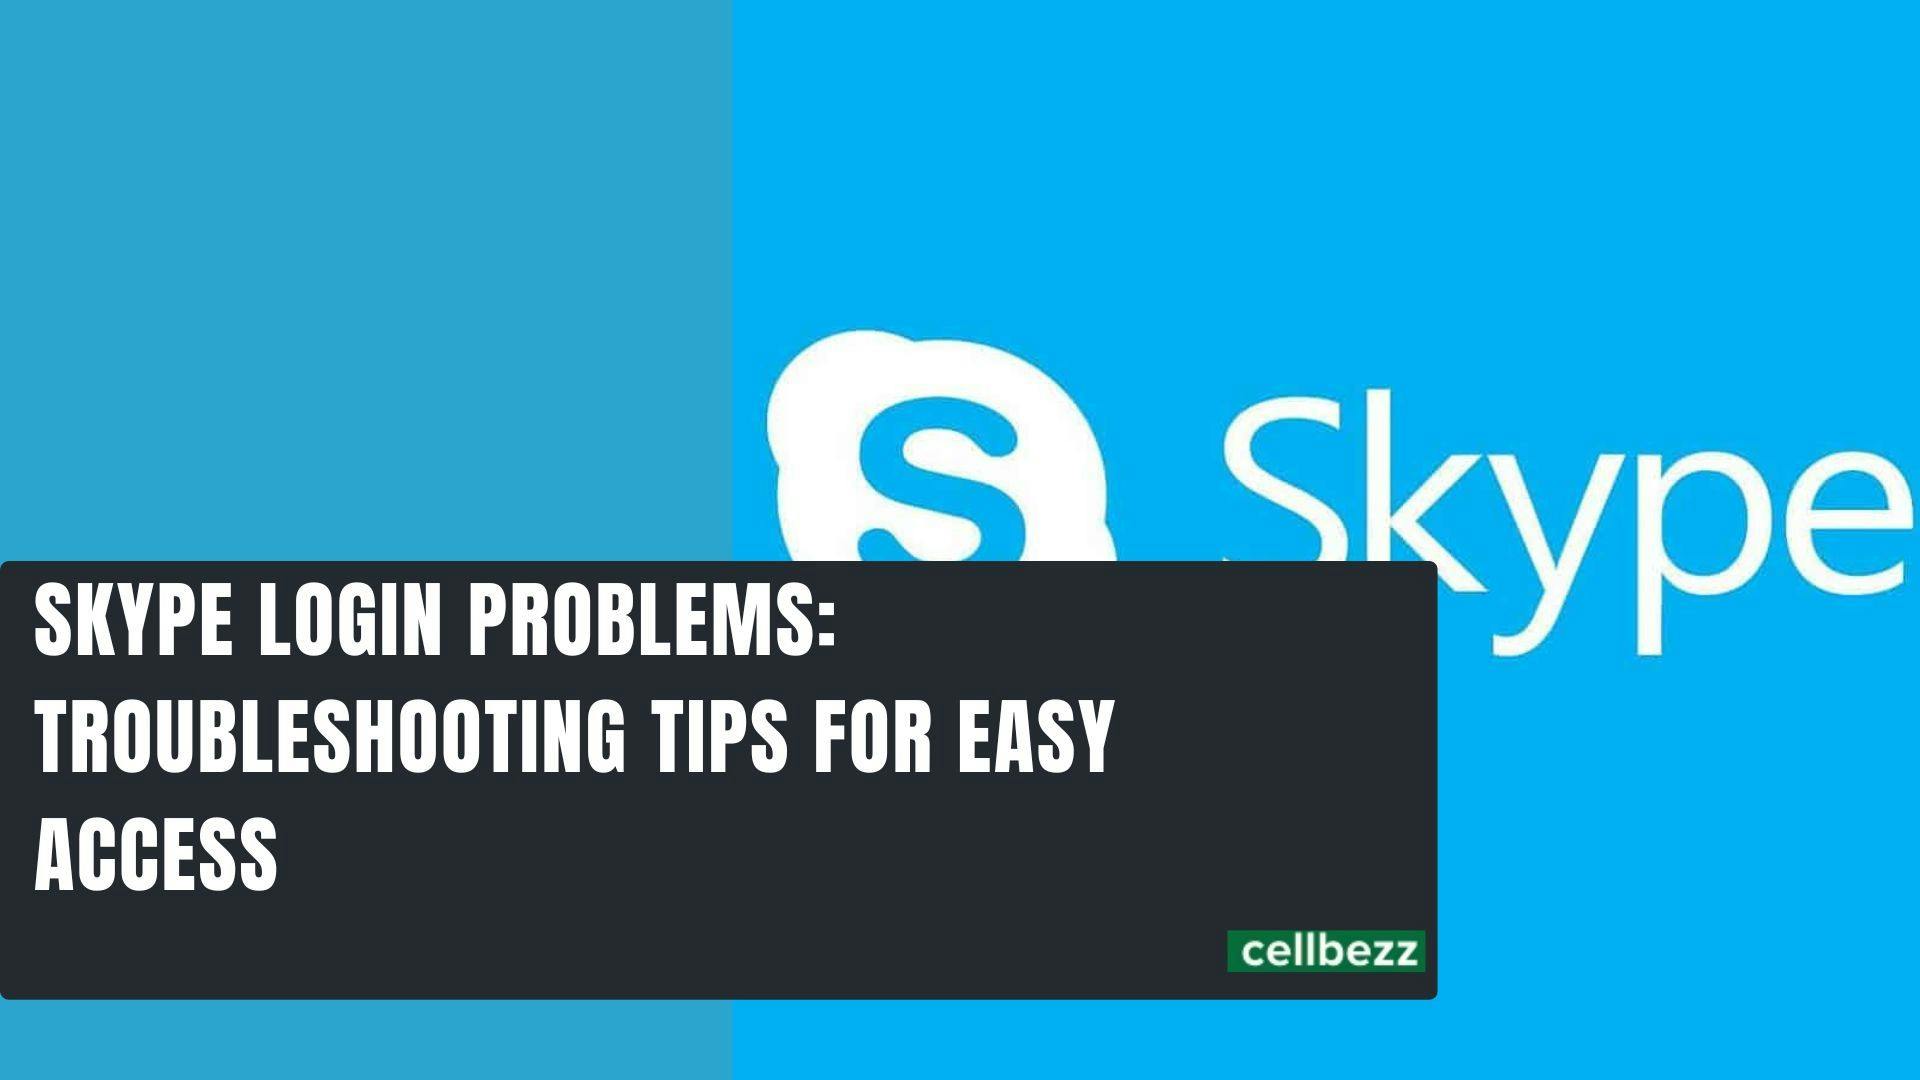 Skype Login Problems: Troubleshooting Tips for Easy Access featured image 